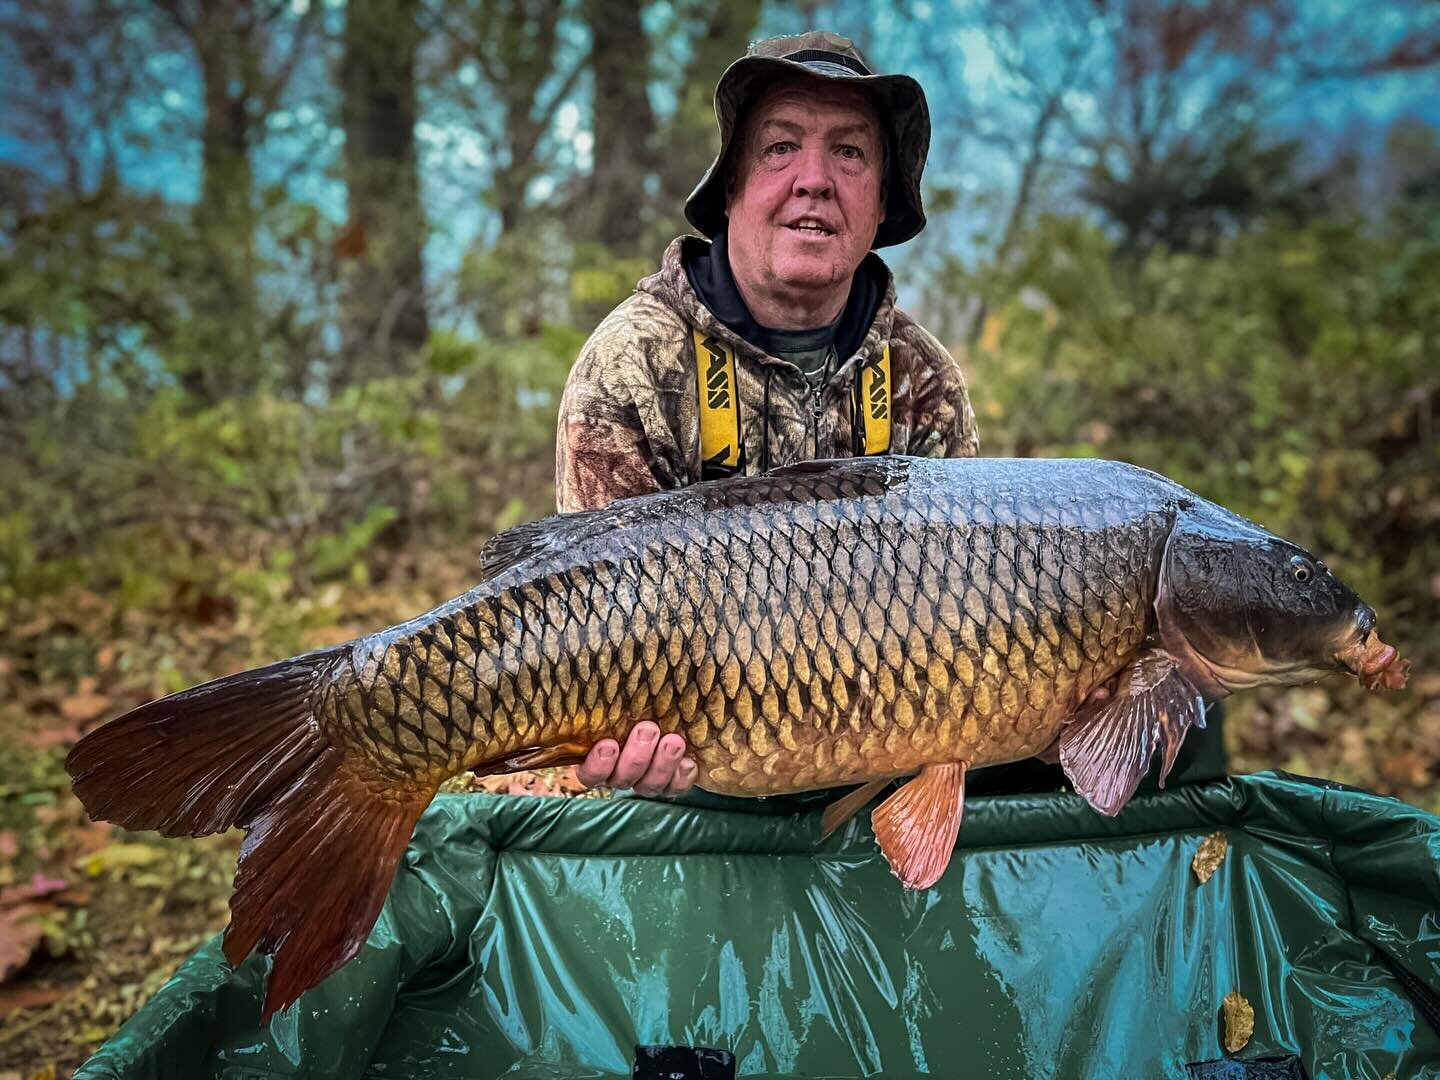 Allan Orchard posing with a special fish from last year! Ricky @rickyhards had the pleasure of holding this fish few months before :) the beauty of catch &amp; Release! 

www.carpbaitusa.com #carpbaitusa #carp #carpfishing #carpfishingusa #teamcarpba